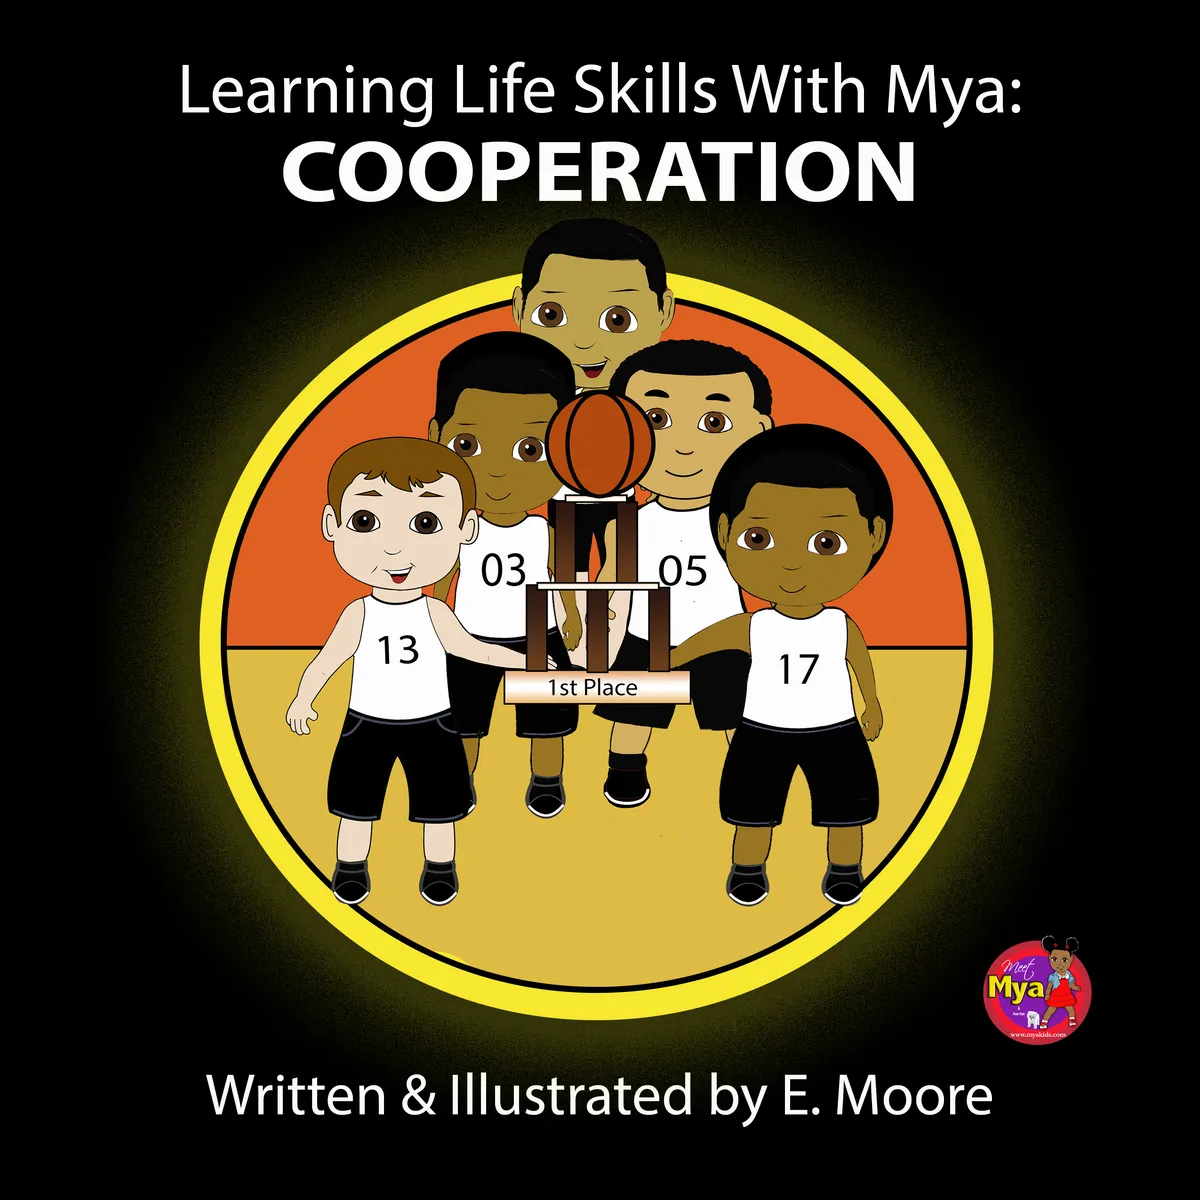 Learning Life Skills With MYA: COOPERATION